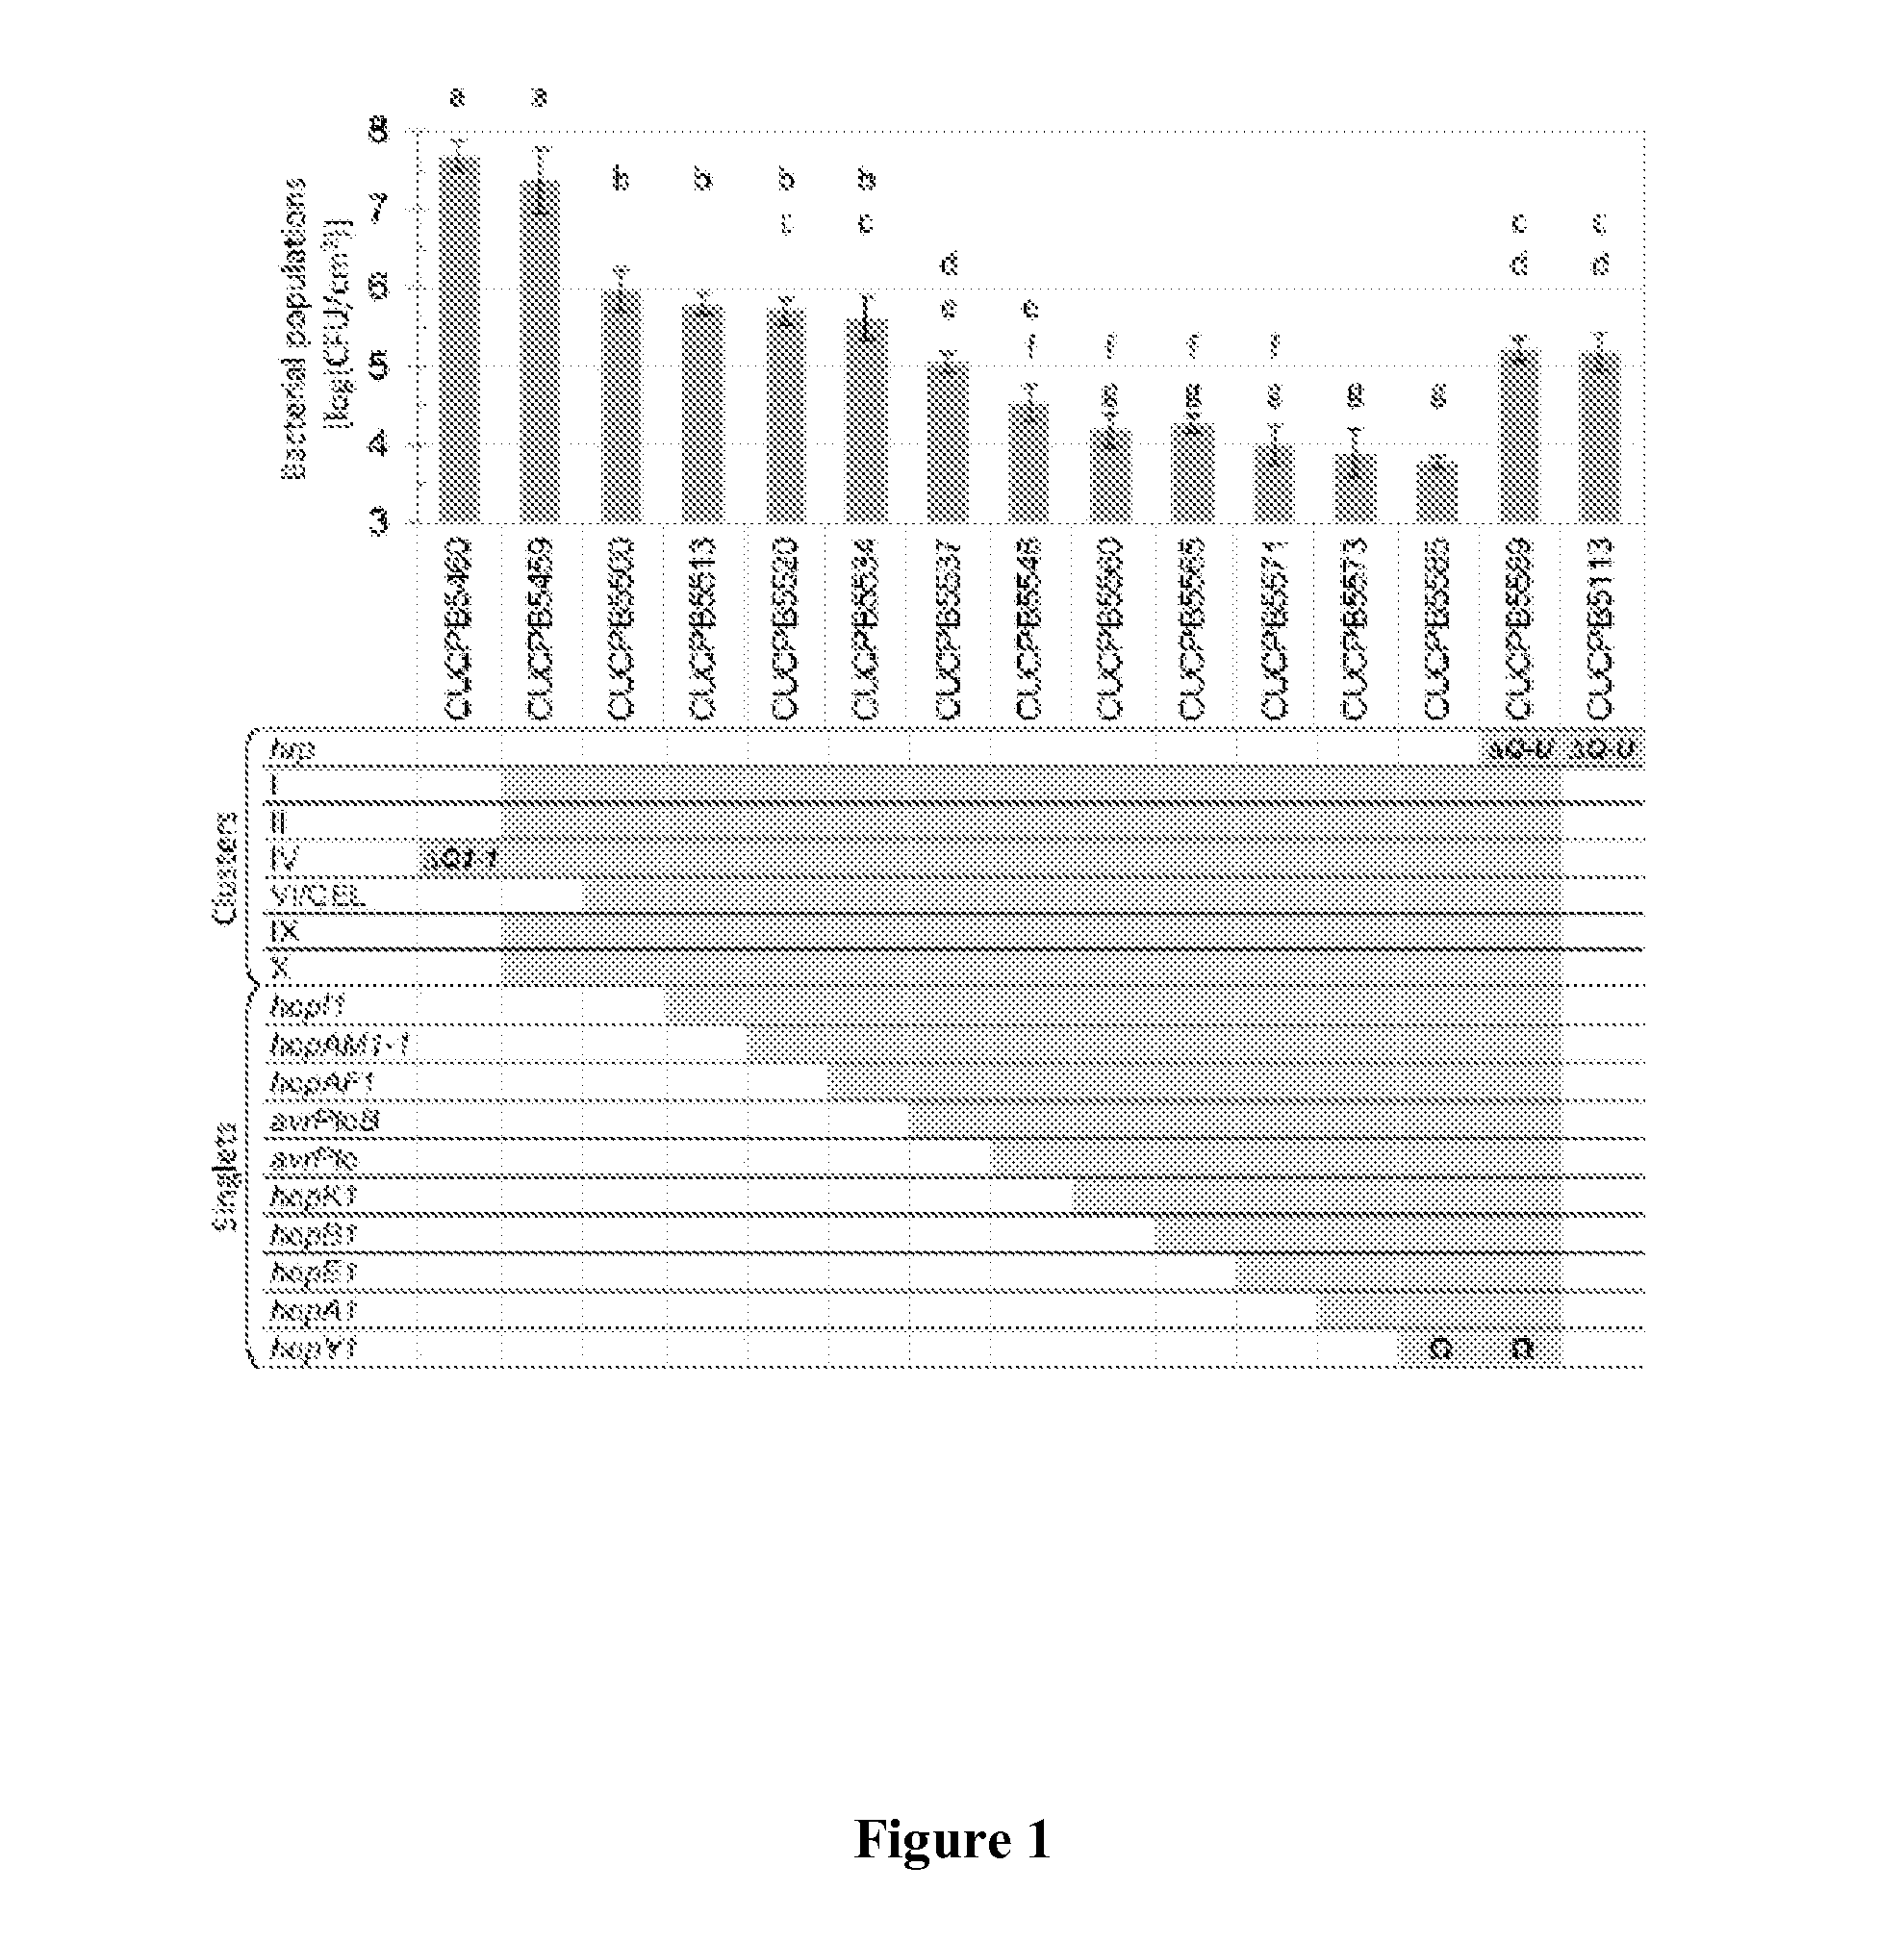 Method of dual-adapter recombination for efficient concatenation of multiple DNA fragments in shuffled or specified arrangements